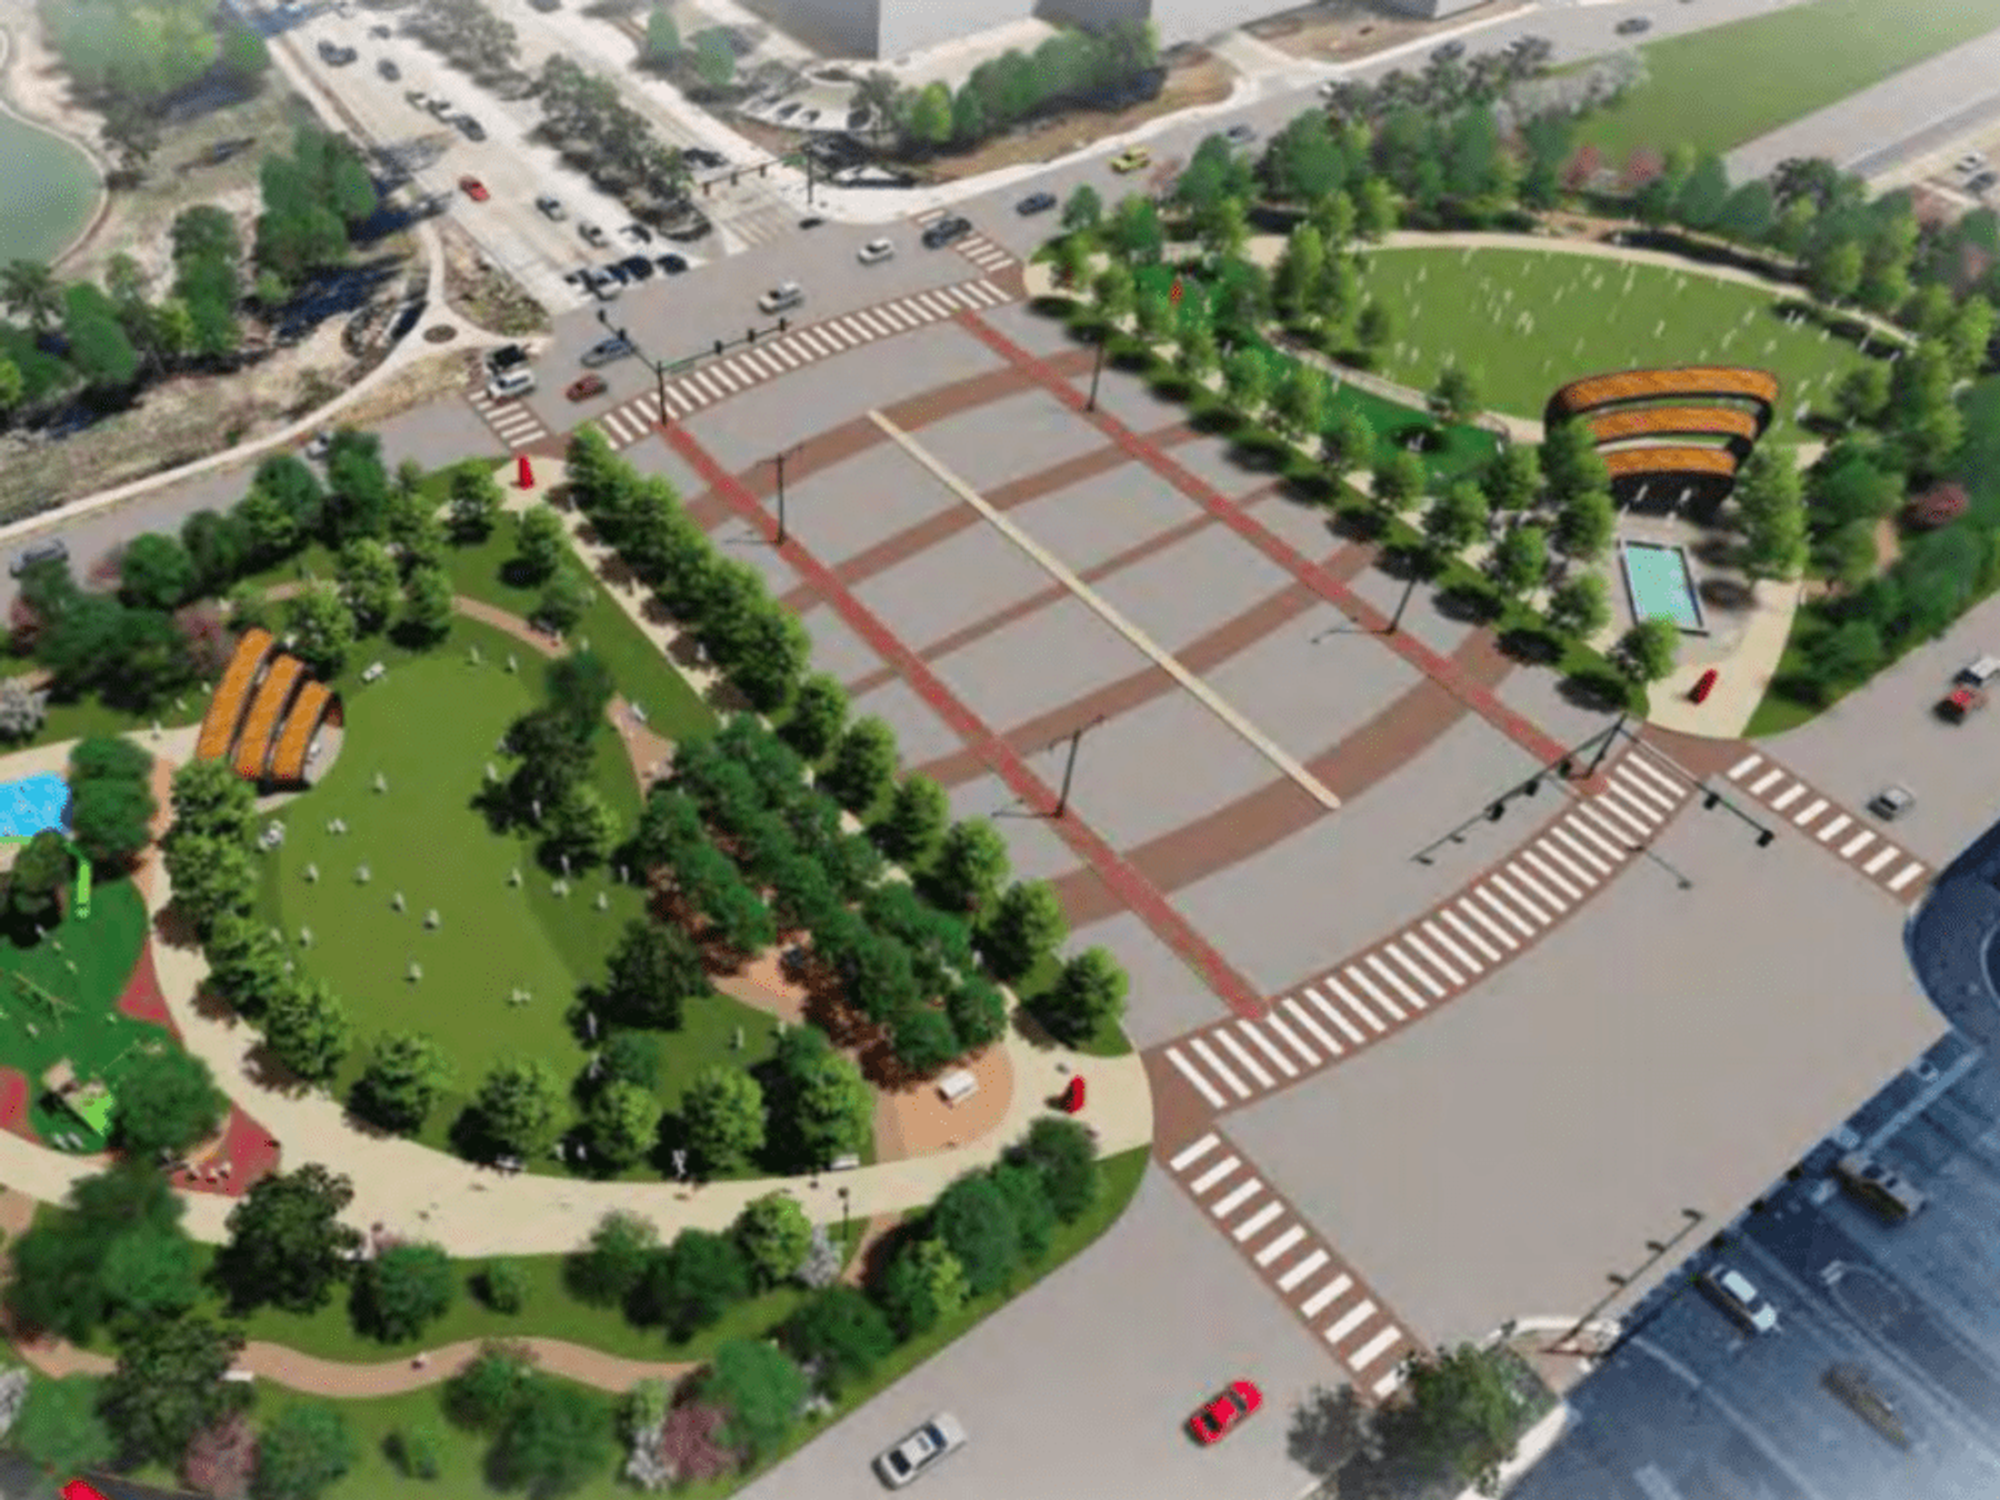 Rendering of proposed Legacy deck park in Plano